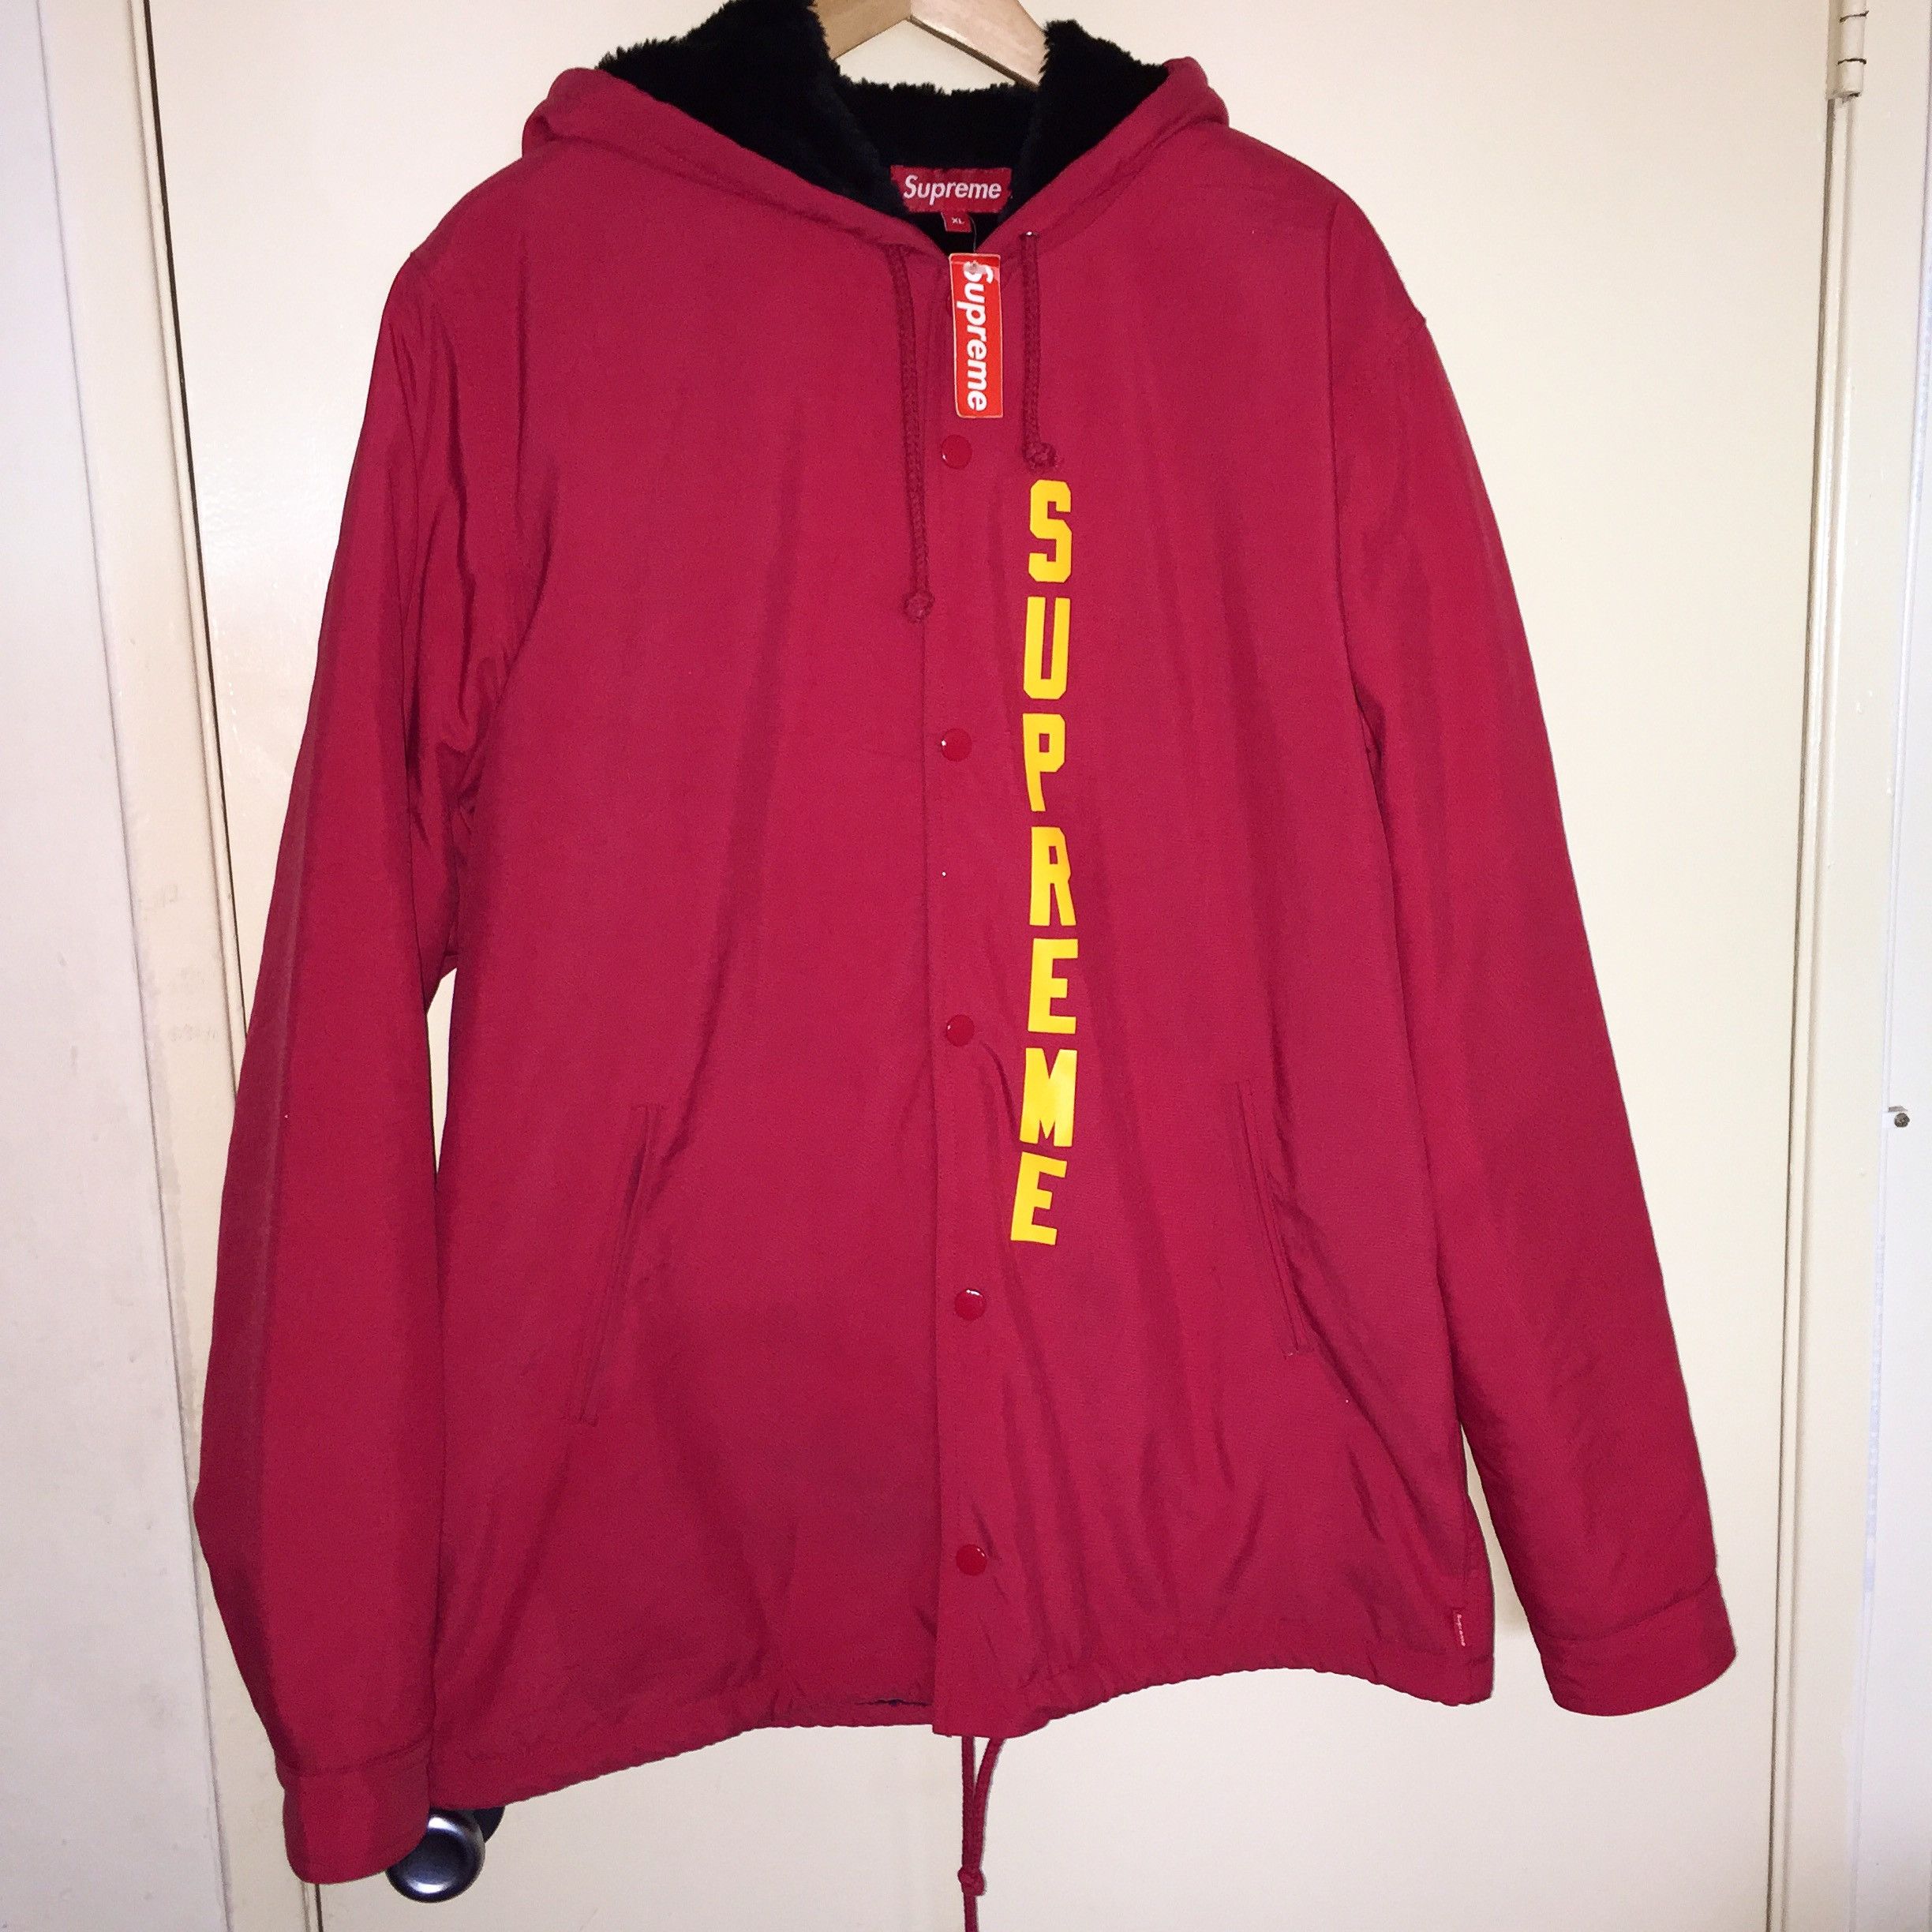 Supreme thrasher hooded coaches | Grailed